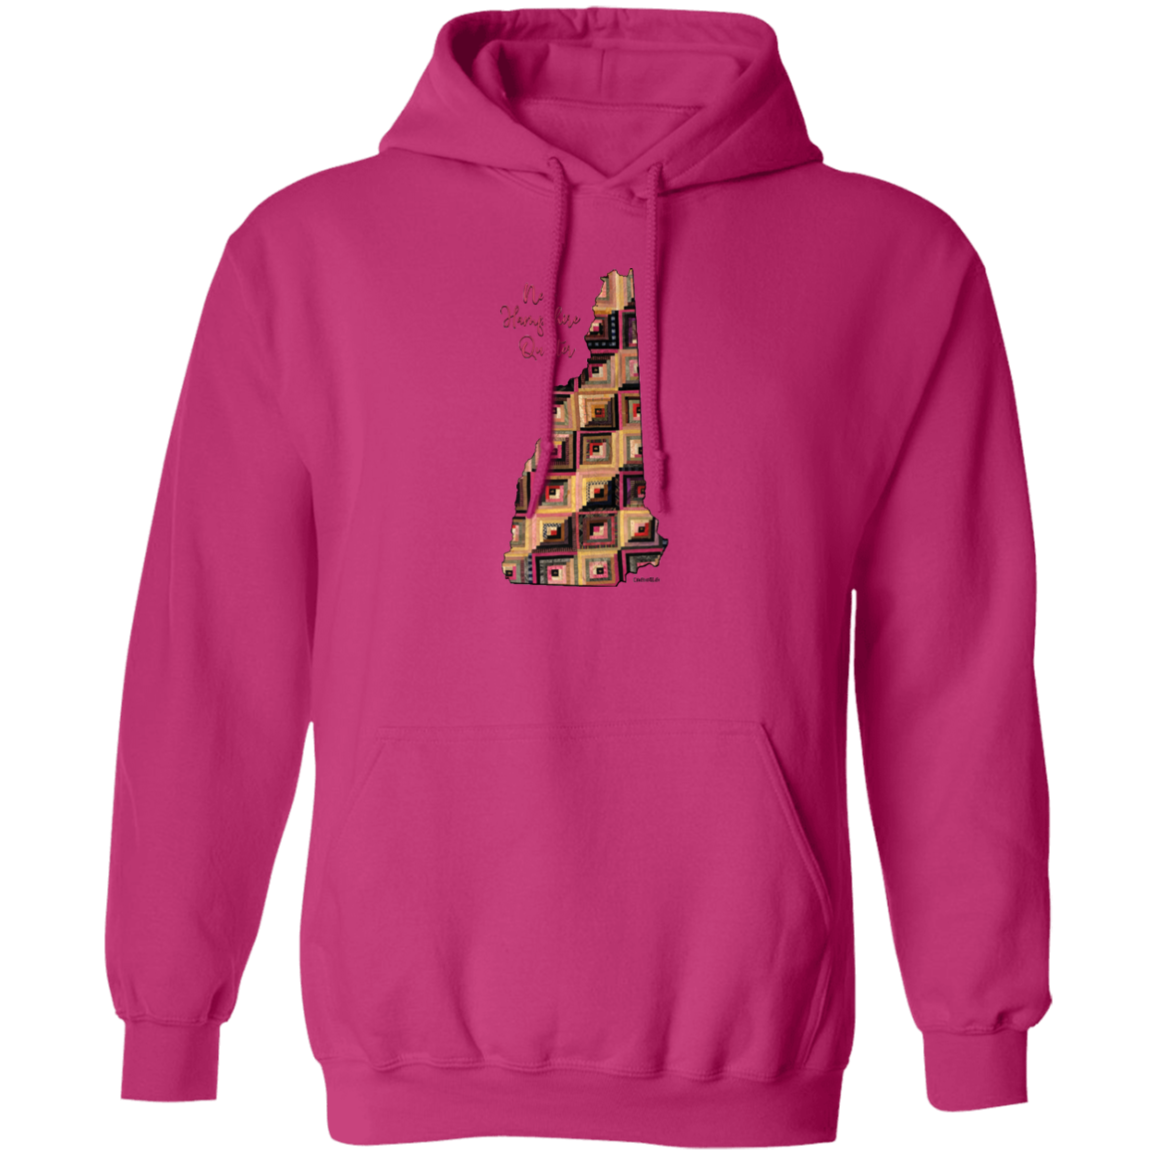 New Hampshire Quilter Pullover Hoodie, Gift for Quilting Friends and Family